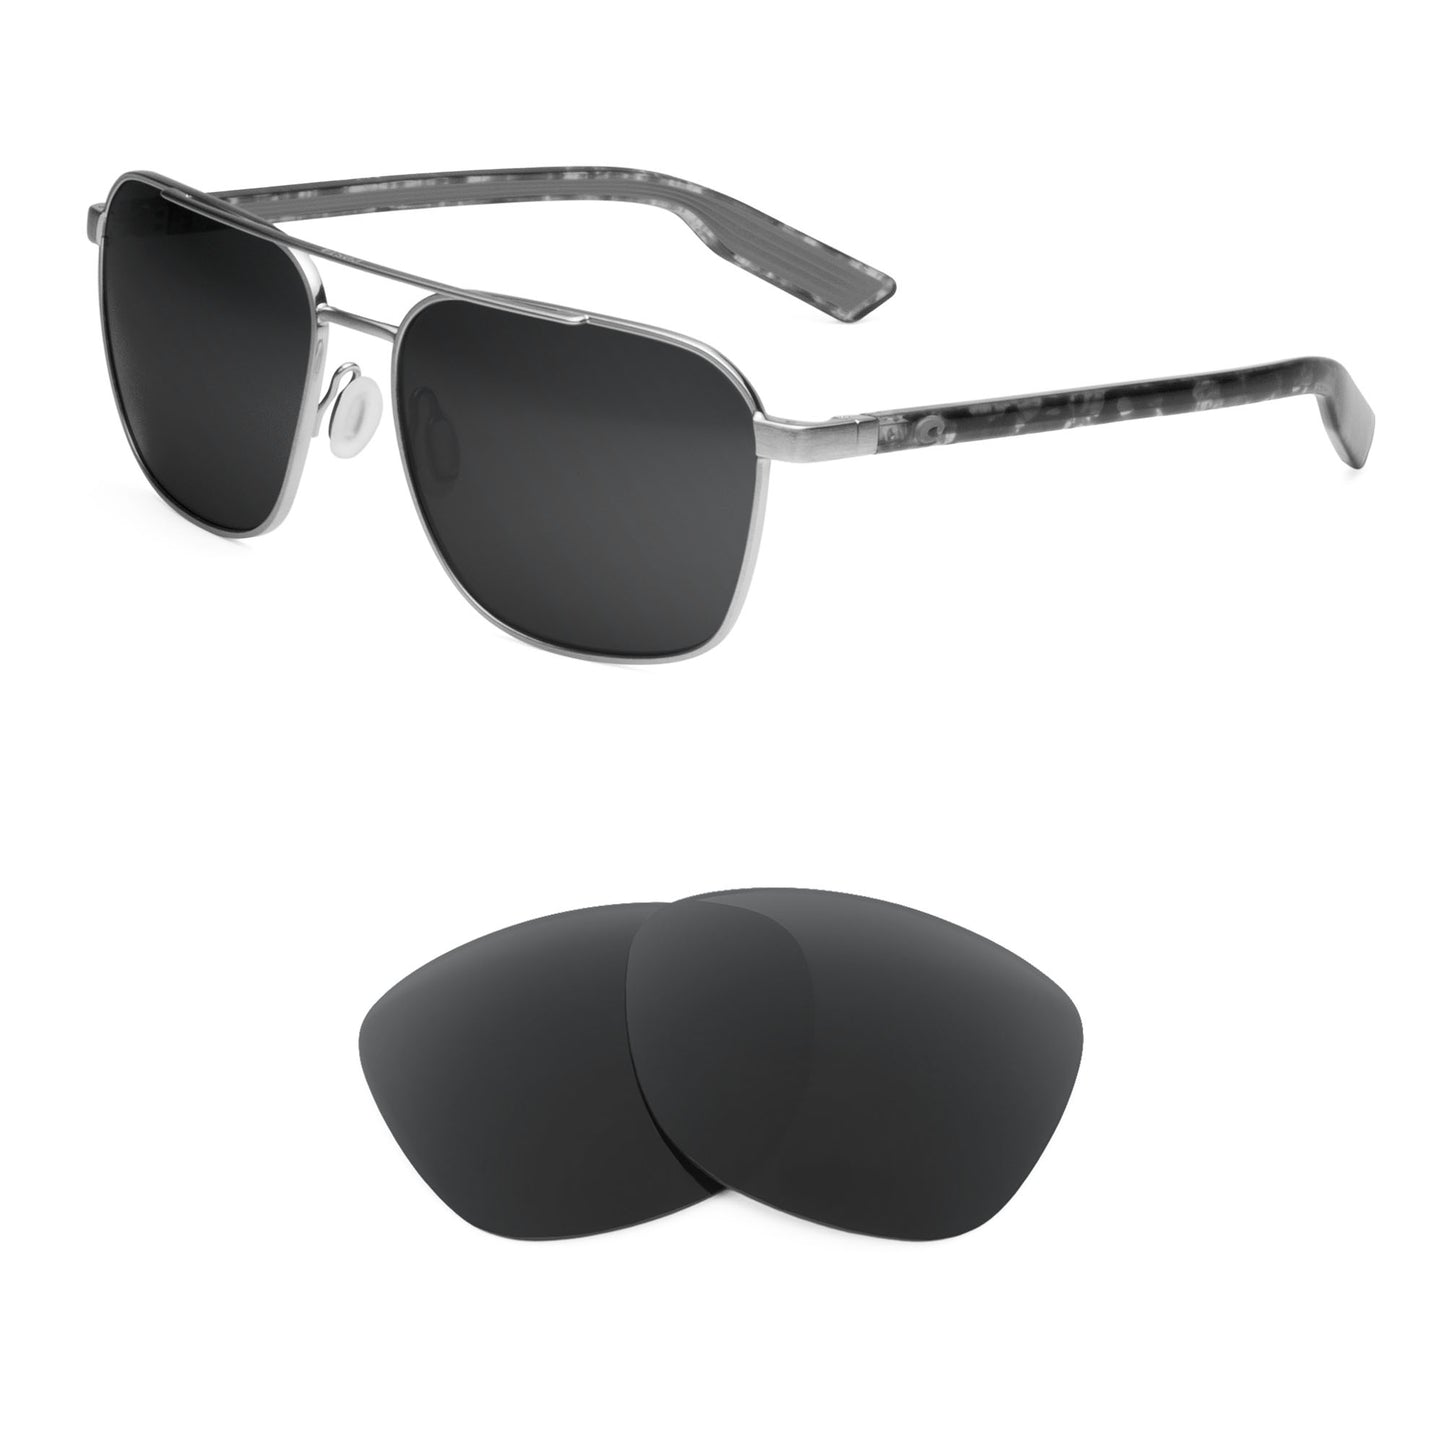 Costa Wader sunglasses with replacement lenses